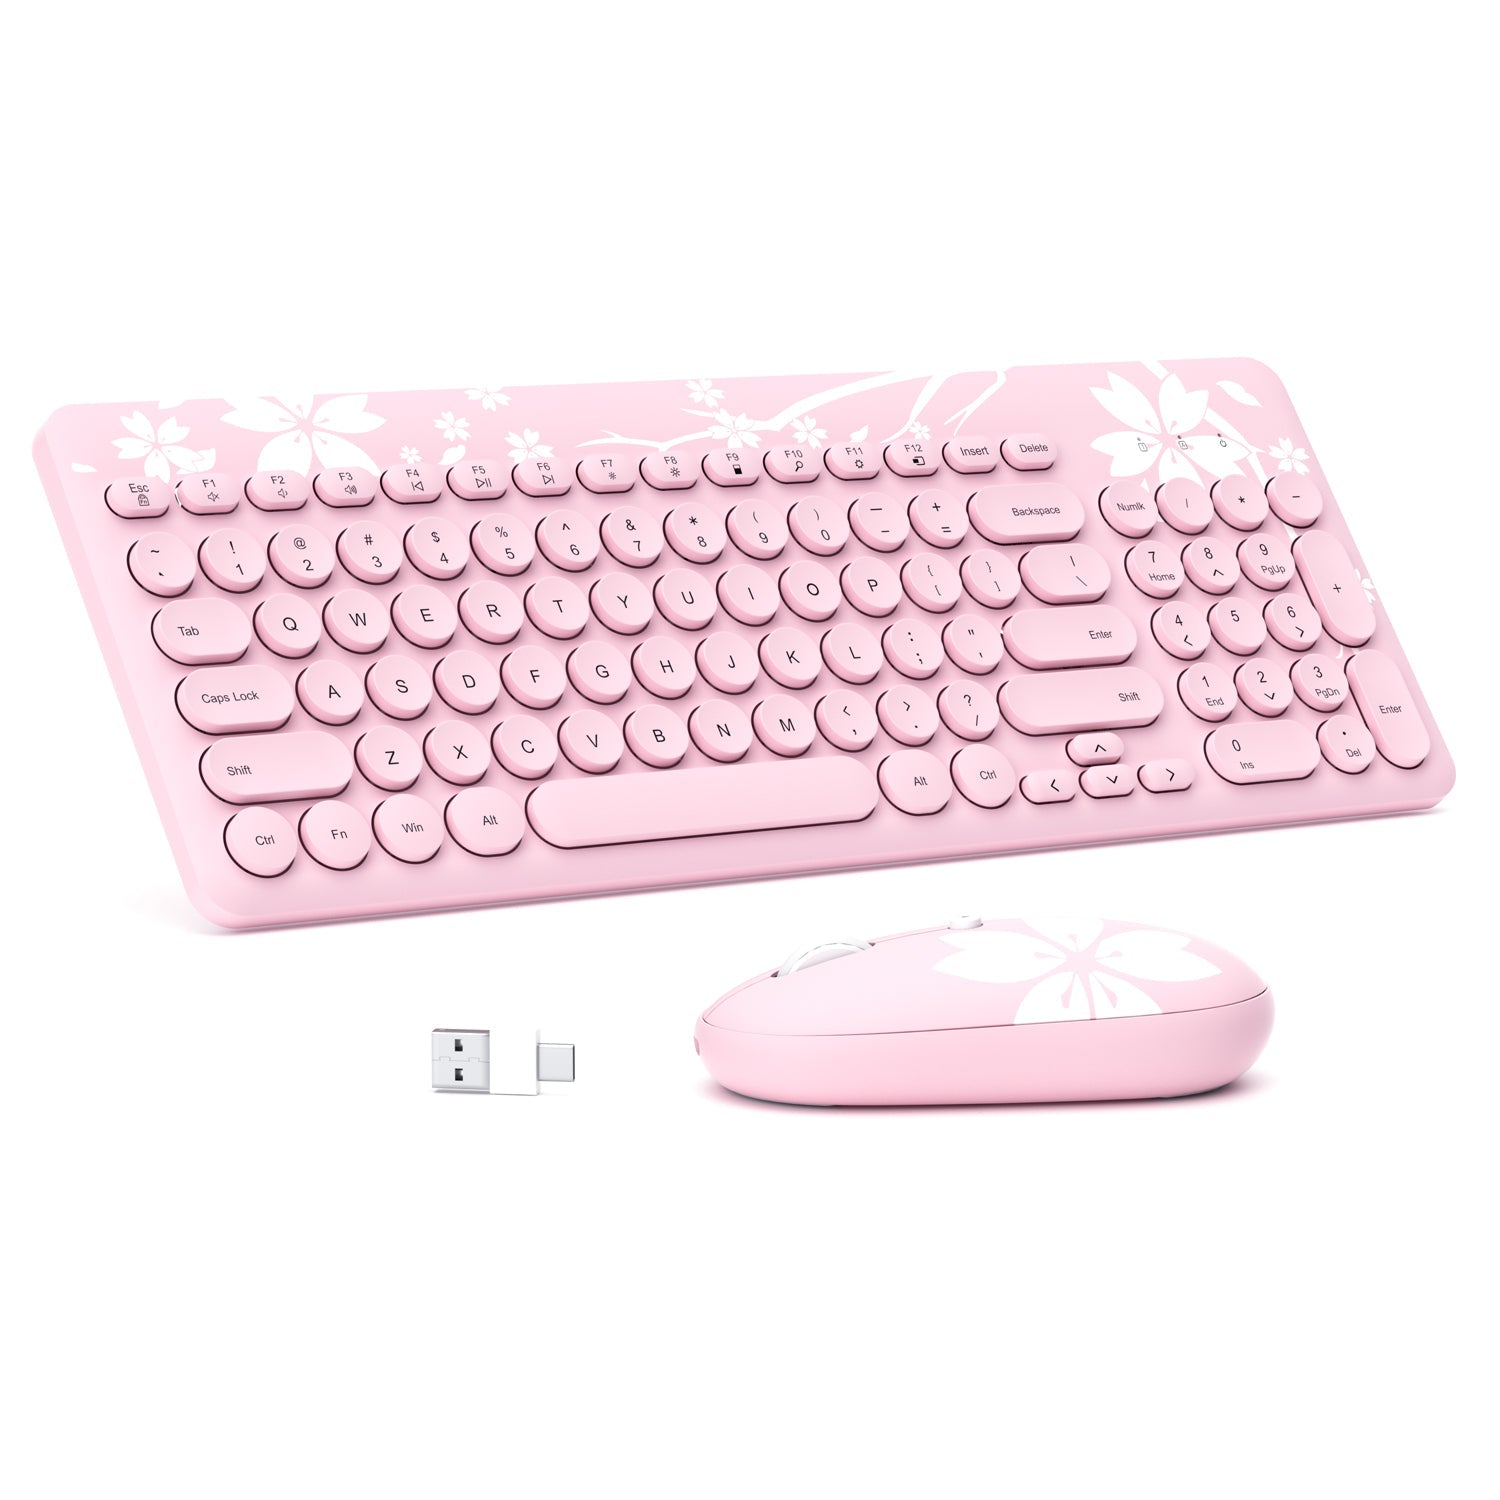 Cherry Blossom Pink Wireless Keyboard and Mouse